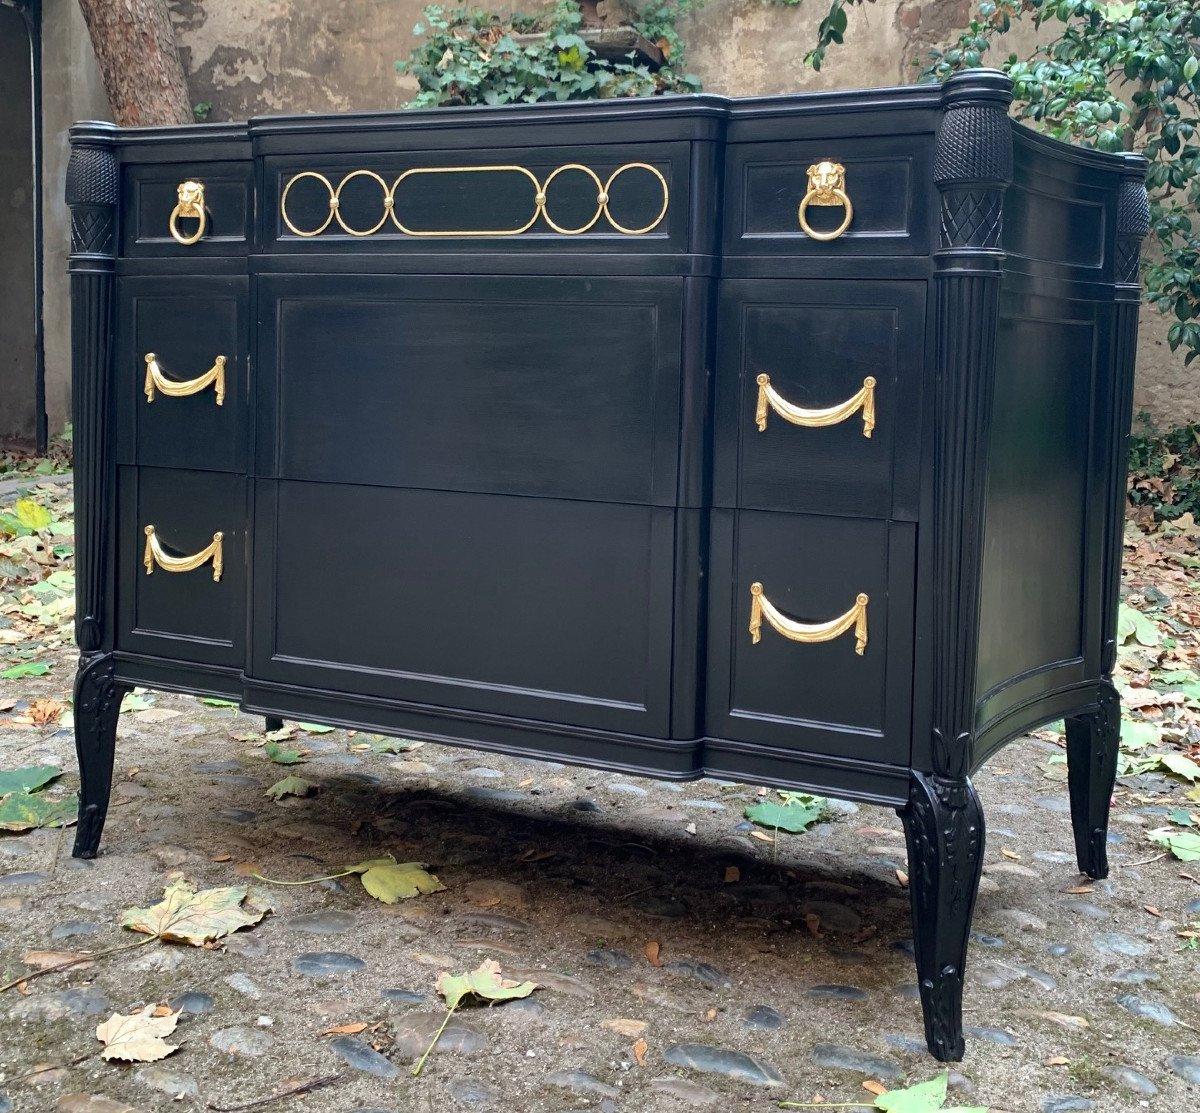 Elegant Louis XVI style chest of drawers in lacquered wood.
Jansen house circa 1960.
Three drawers on the front, the two main ones without crosspieces.
Finely sculpted uprights and legs.
Curved sides.
Apparatus of gilded bronzes.
Bears model